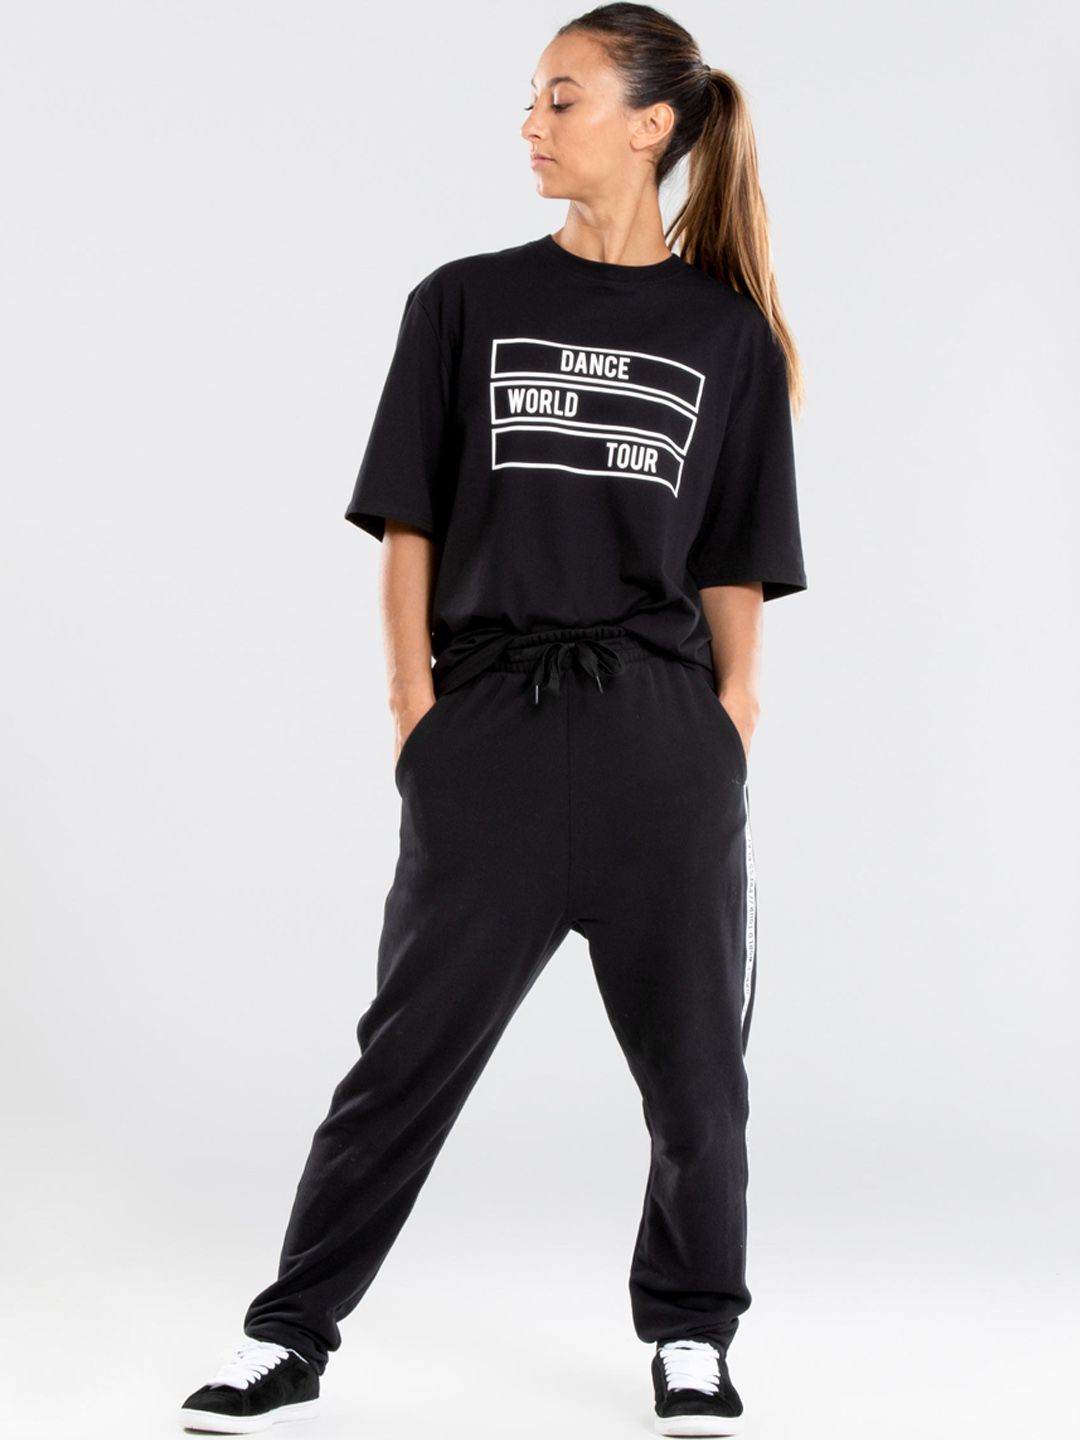 Domyos By Decathlon Women Black Urban Dance Tapered Solid Track Pants Price in India